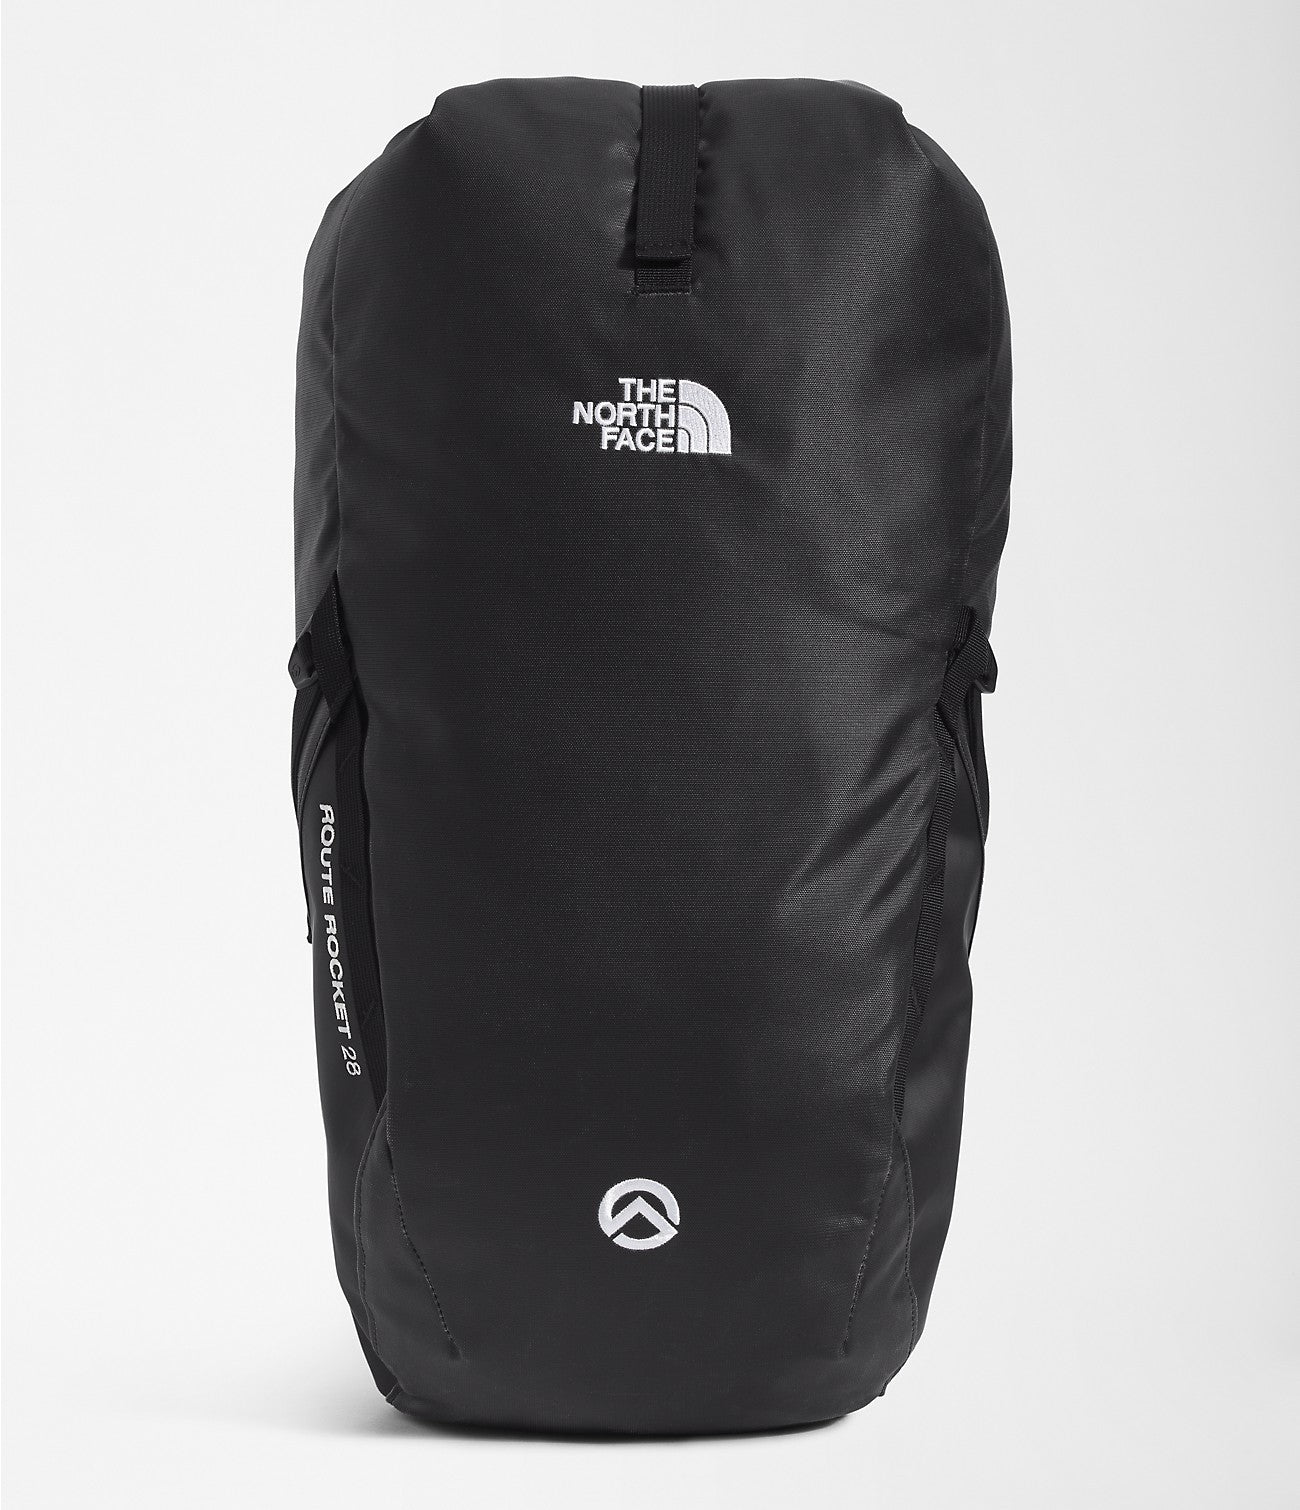 The North Face Route Rocket 28